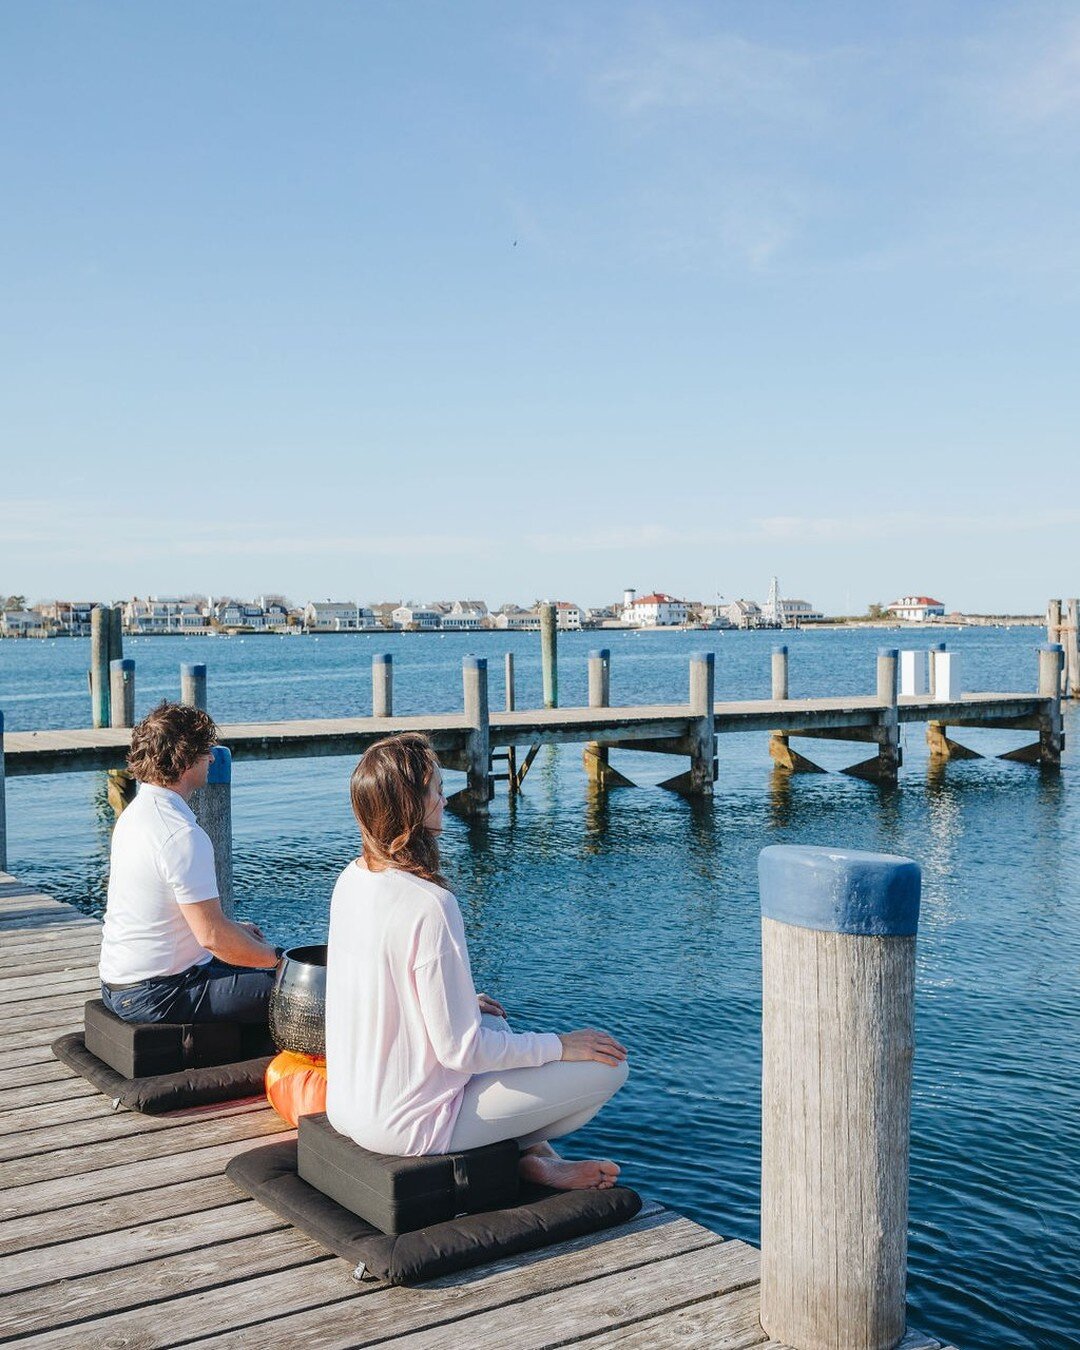 Start where you are. Every situation is workable. Nantucket has endless perches for sitting down to take a breath. What are your favorite spots?